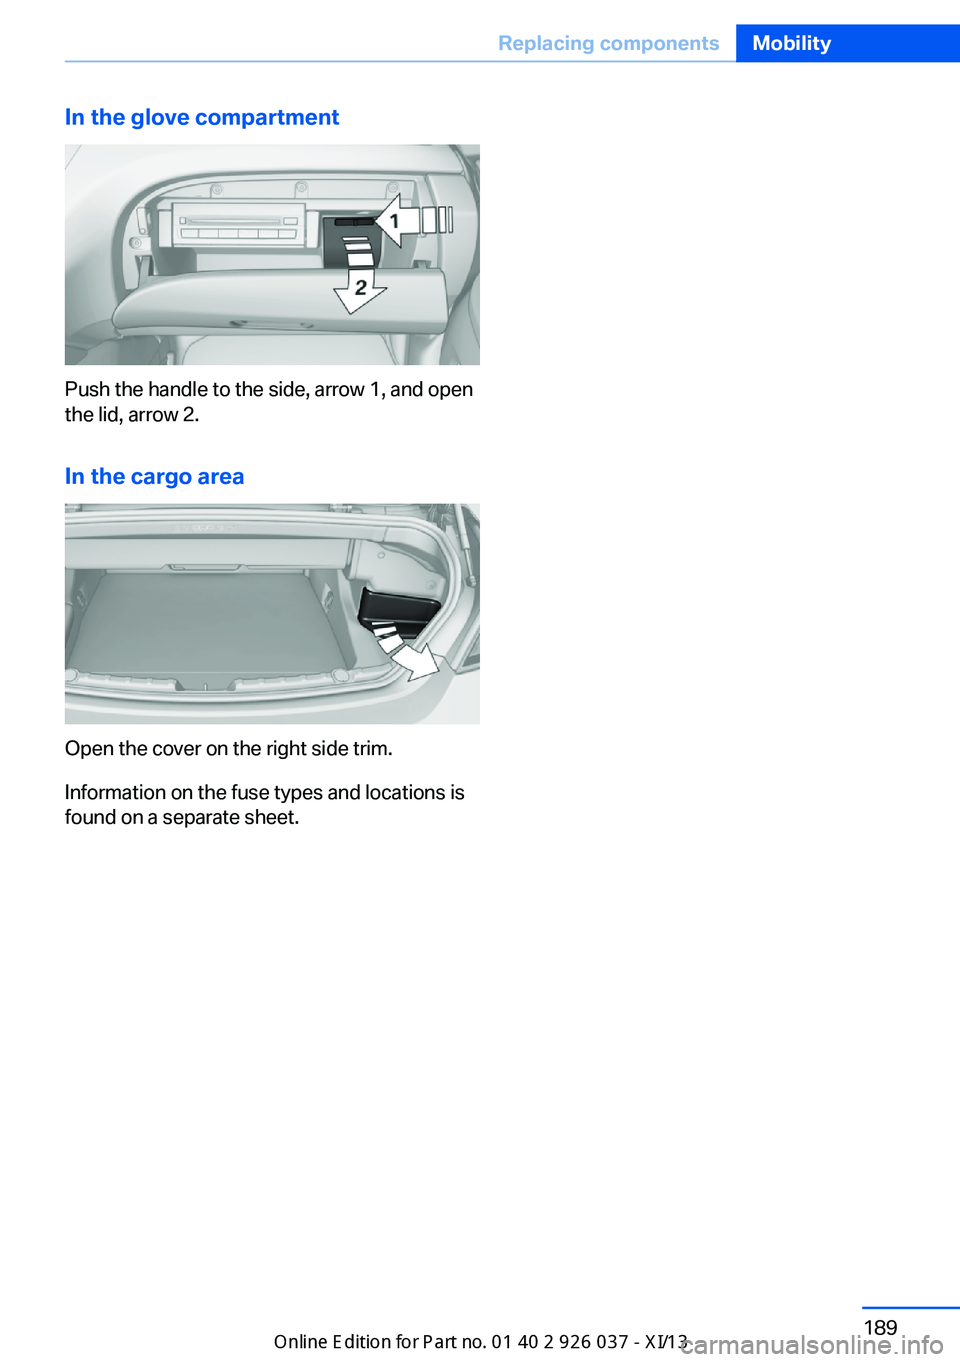 BMW M6 CONVERTIBLE 2013 F12 Owners Manual In the glove compartment
Push the handle to the side, arrow 1, and open
the lid, arrow 2.
In the cargo area
Open the cover on the right side trim.
Information on the fuse types and locations is
found 